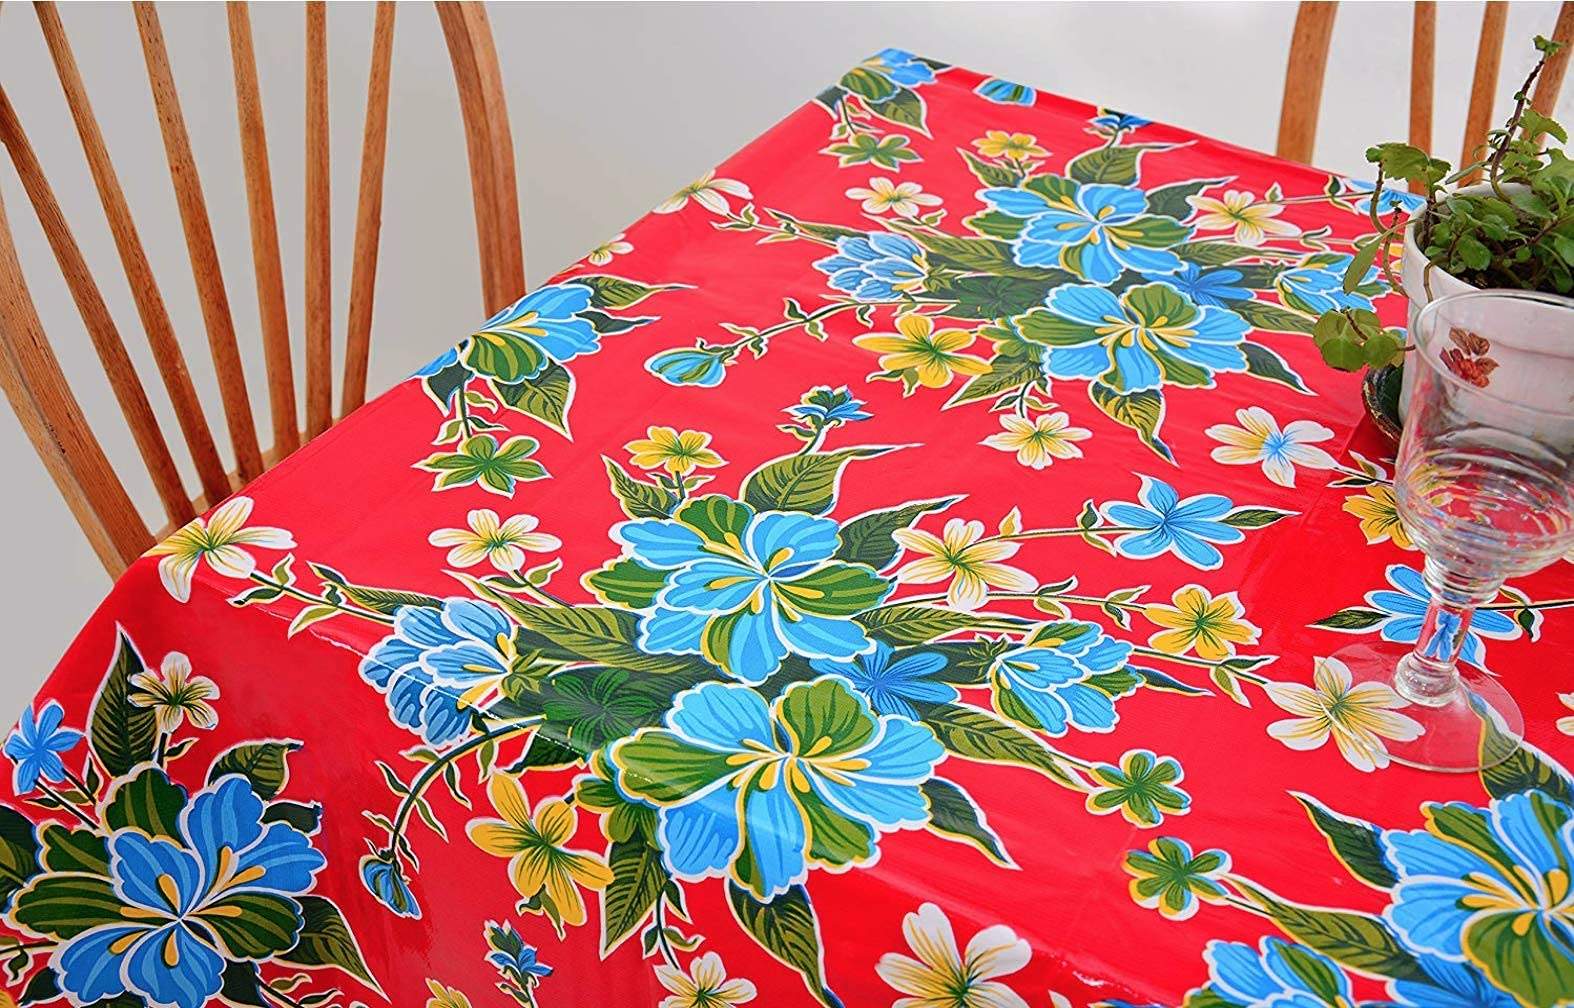 Transform Your Table With A DIY Oilcloth Table Cover: A Home Improvement Project